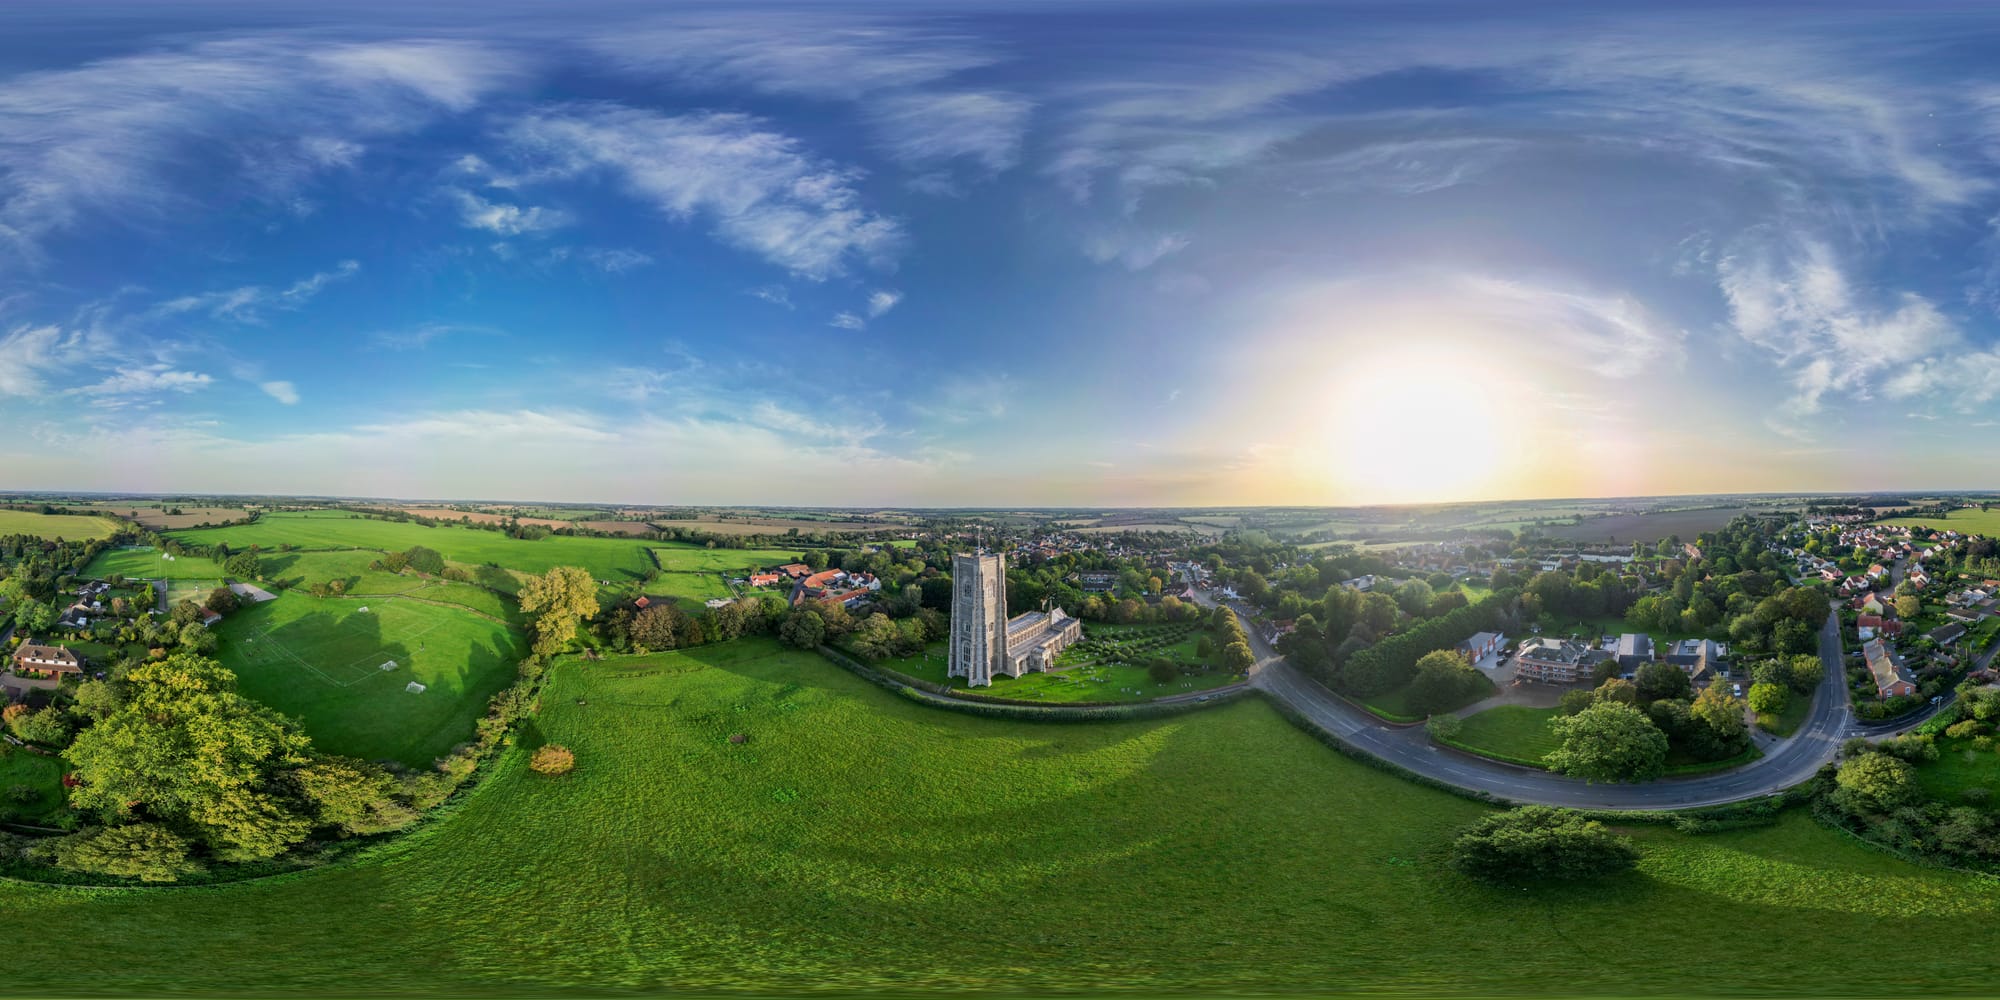 Be there: St. Peter and St. Paul, Lavenham in glorious VR